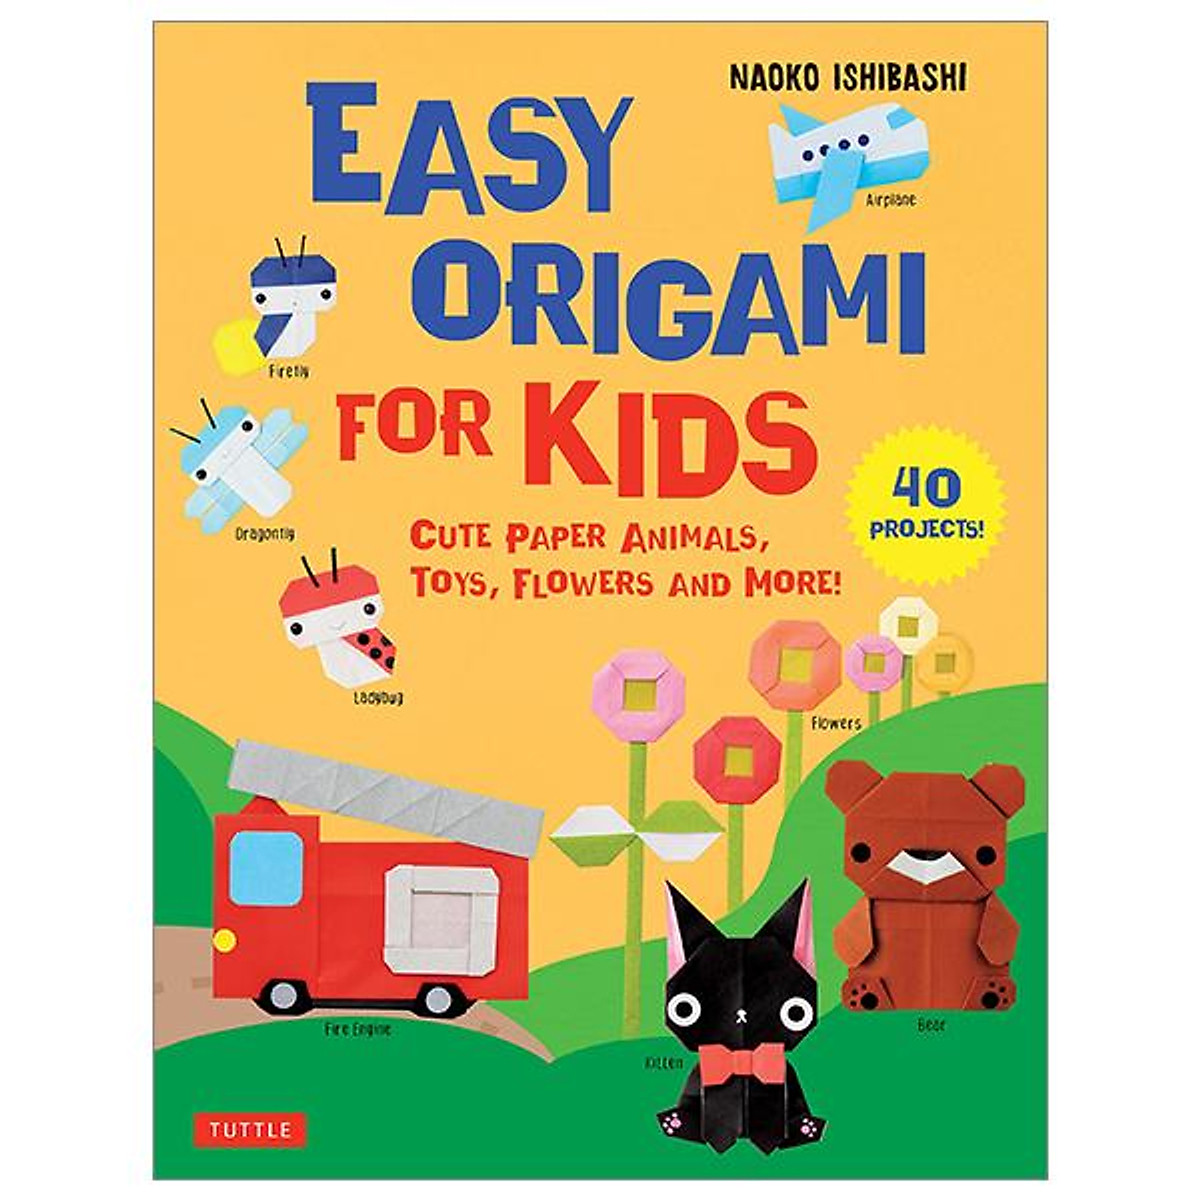 Easy Origami For Kids: Cute Paper Animals, Toys, Flowers And More! (40 Projects)